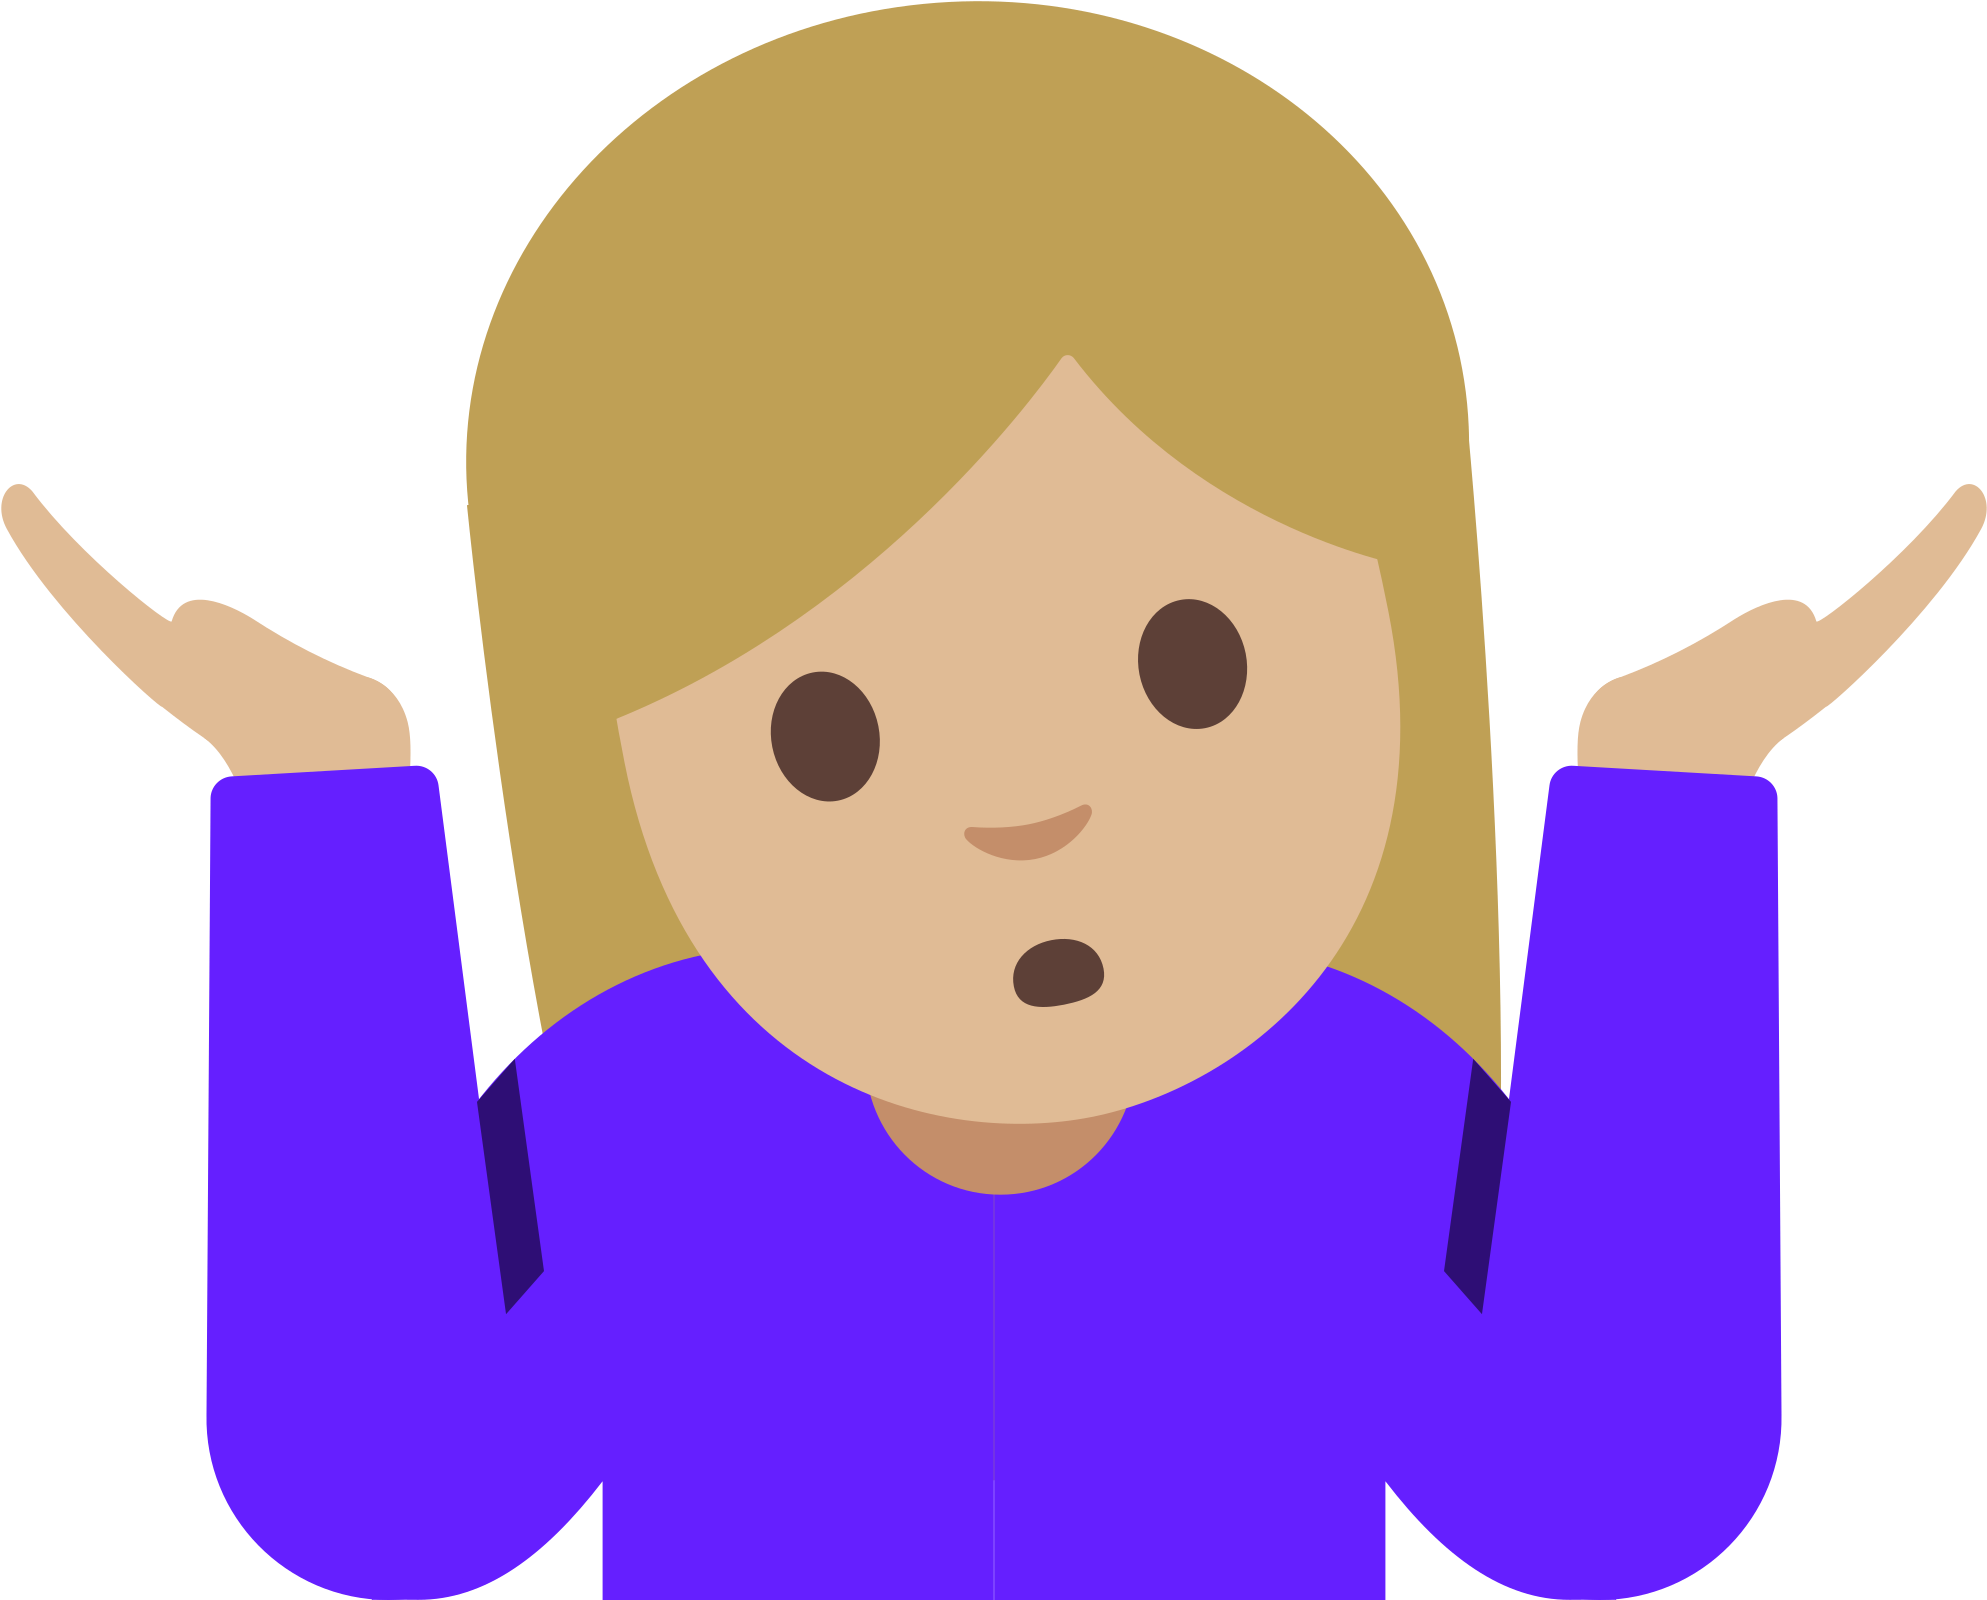 A Cartoon Of A Girl With Her Hands Up